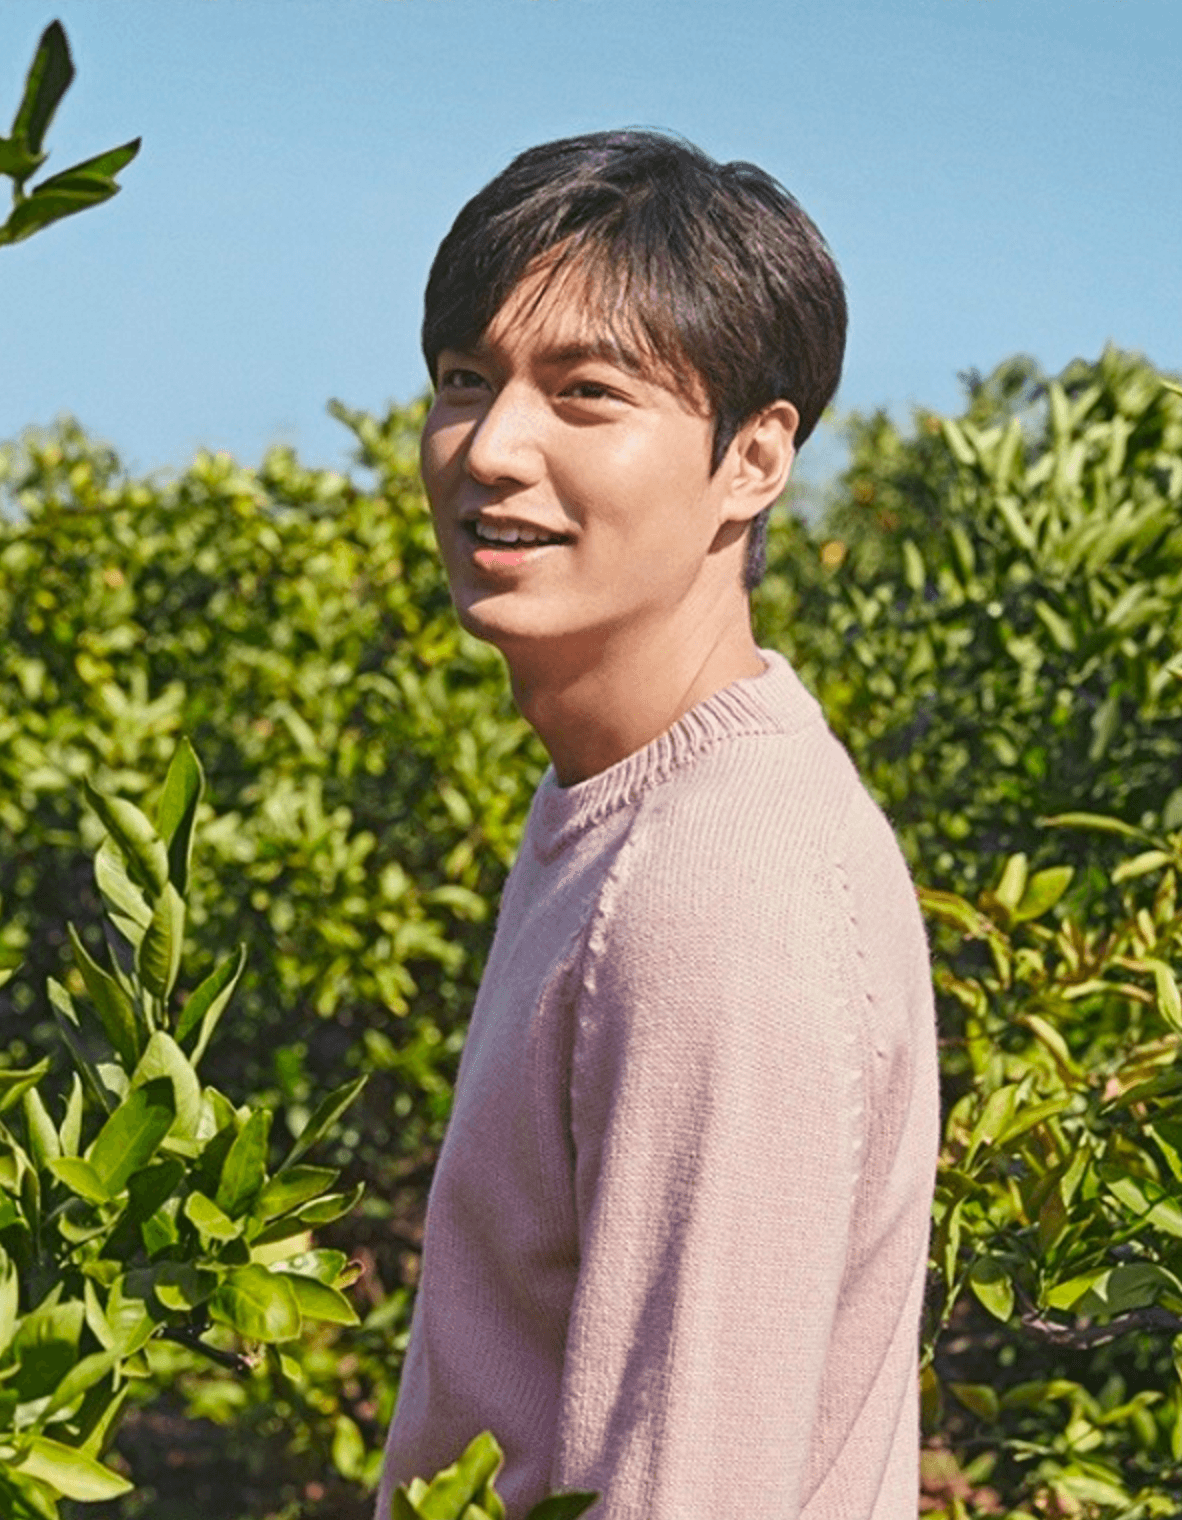 This is Lee Min Ho's latest photoshoot before joining the army - Koreaboo